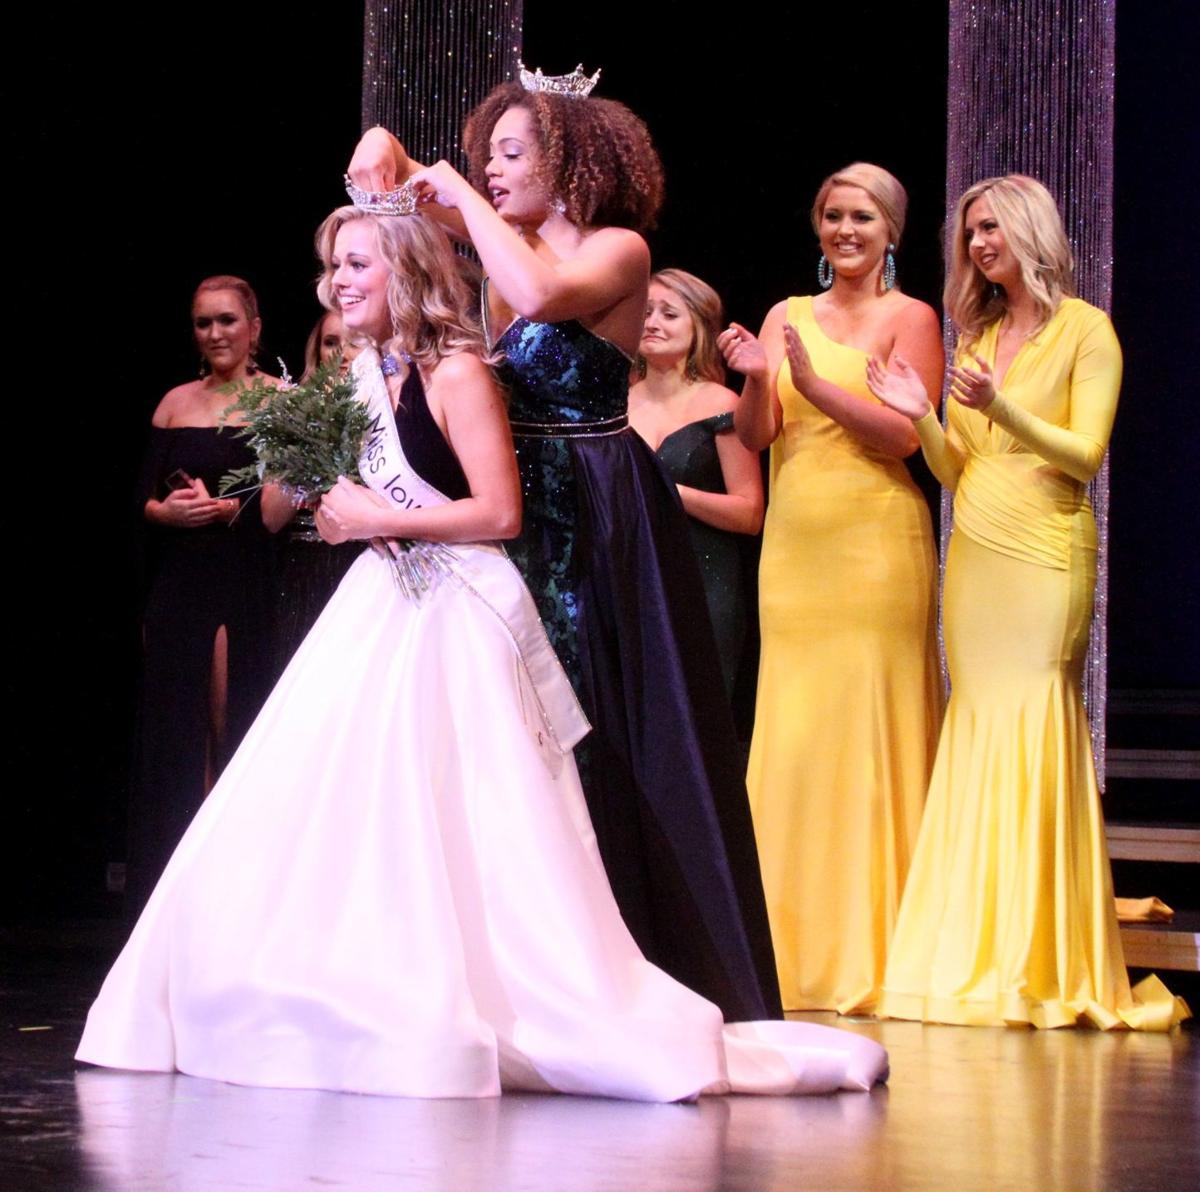 Bettendorf S Emily Tinsman Is Crowned Miss Iowa